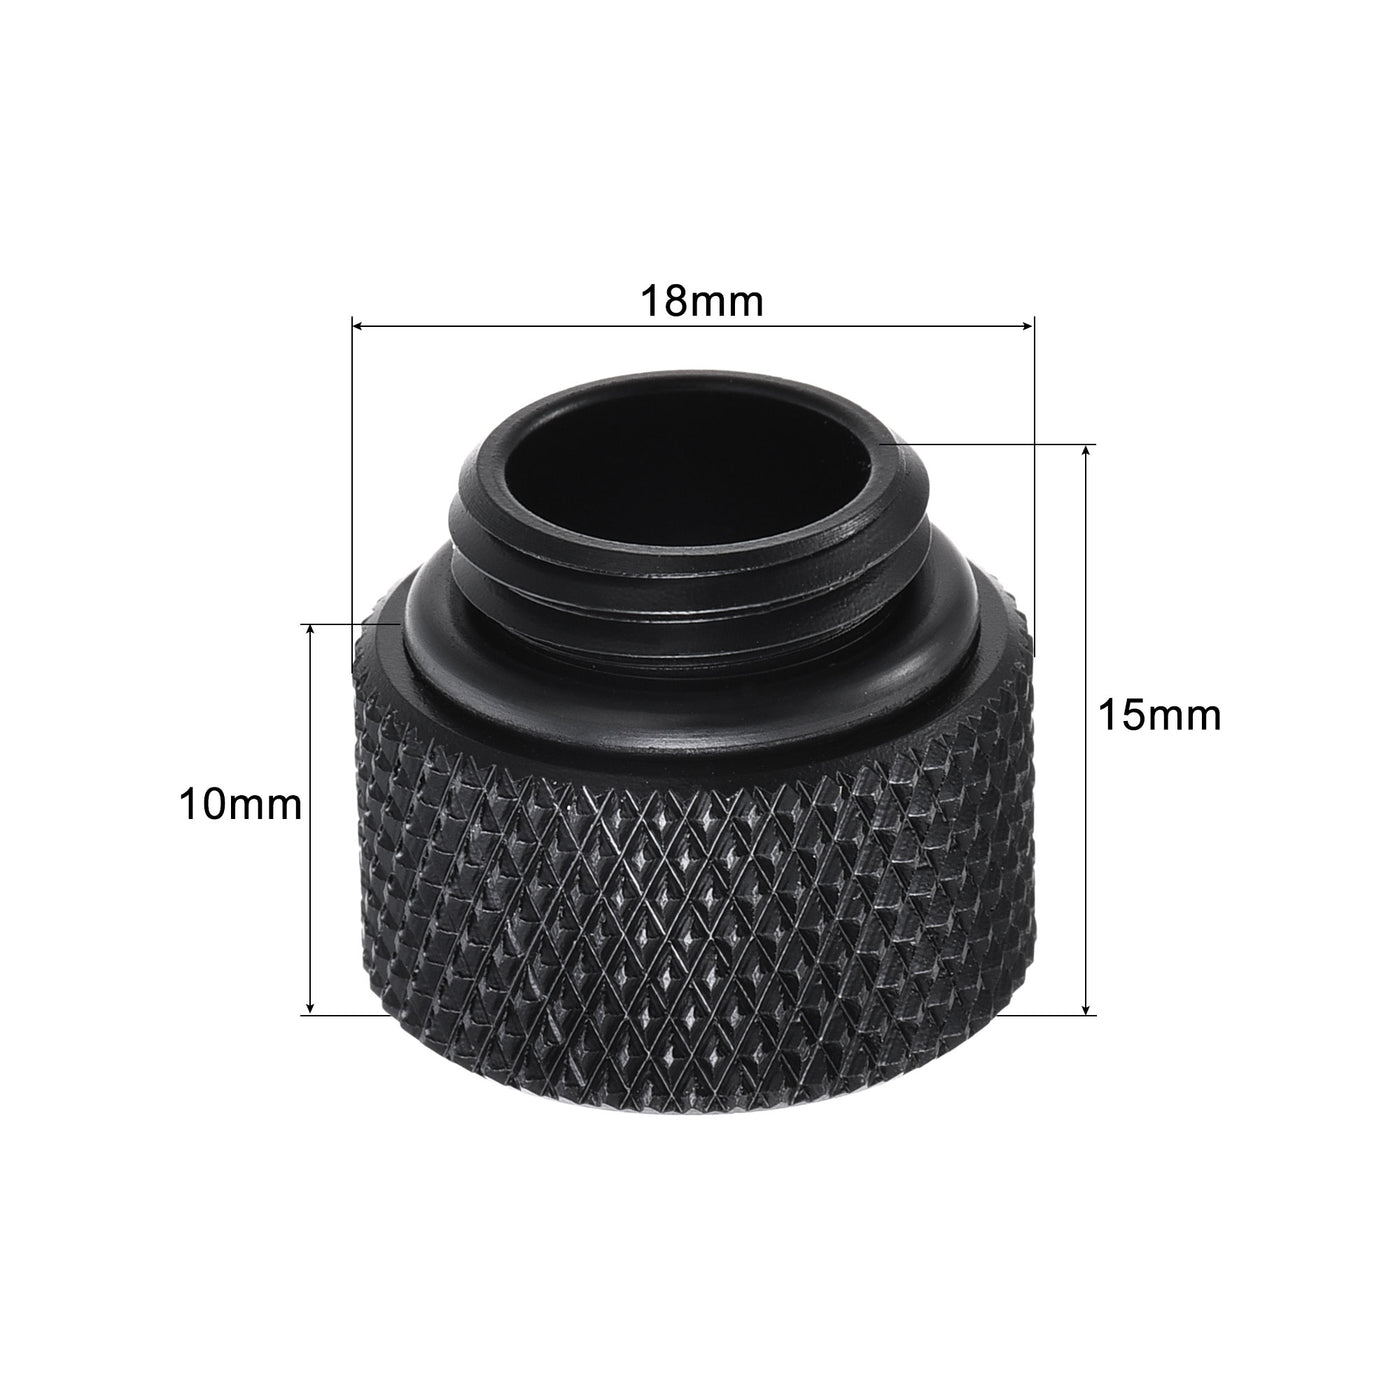 uxcell Uxcell Male to Female Extender Fitting G1/4 x 10mm for Water Cooling System Black 4pcs